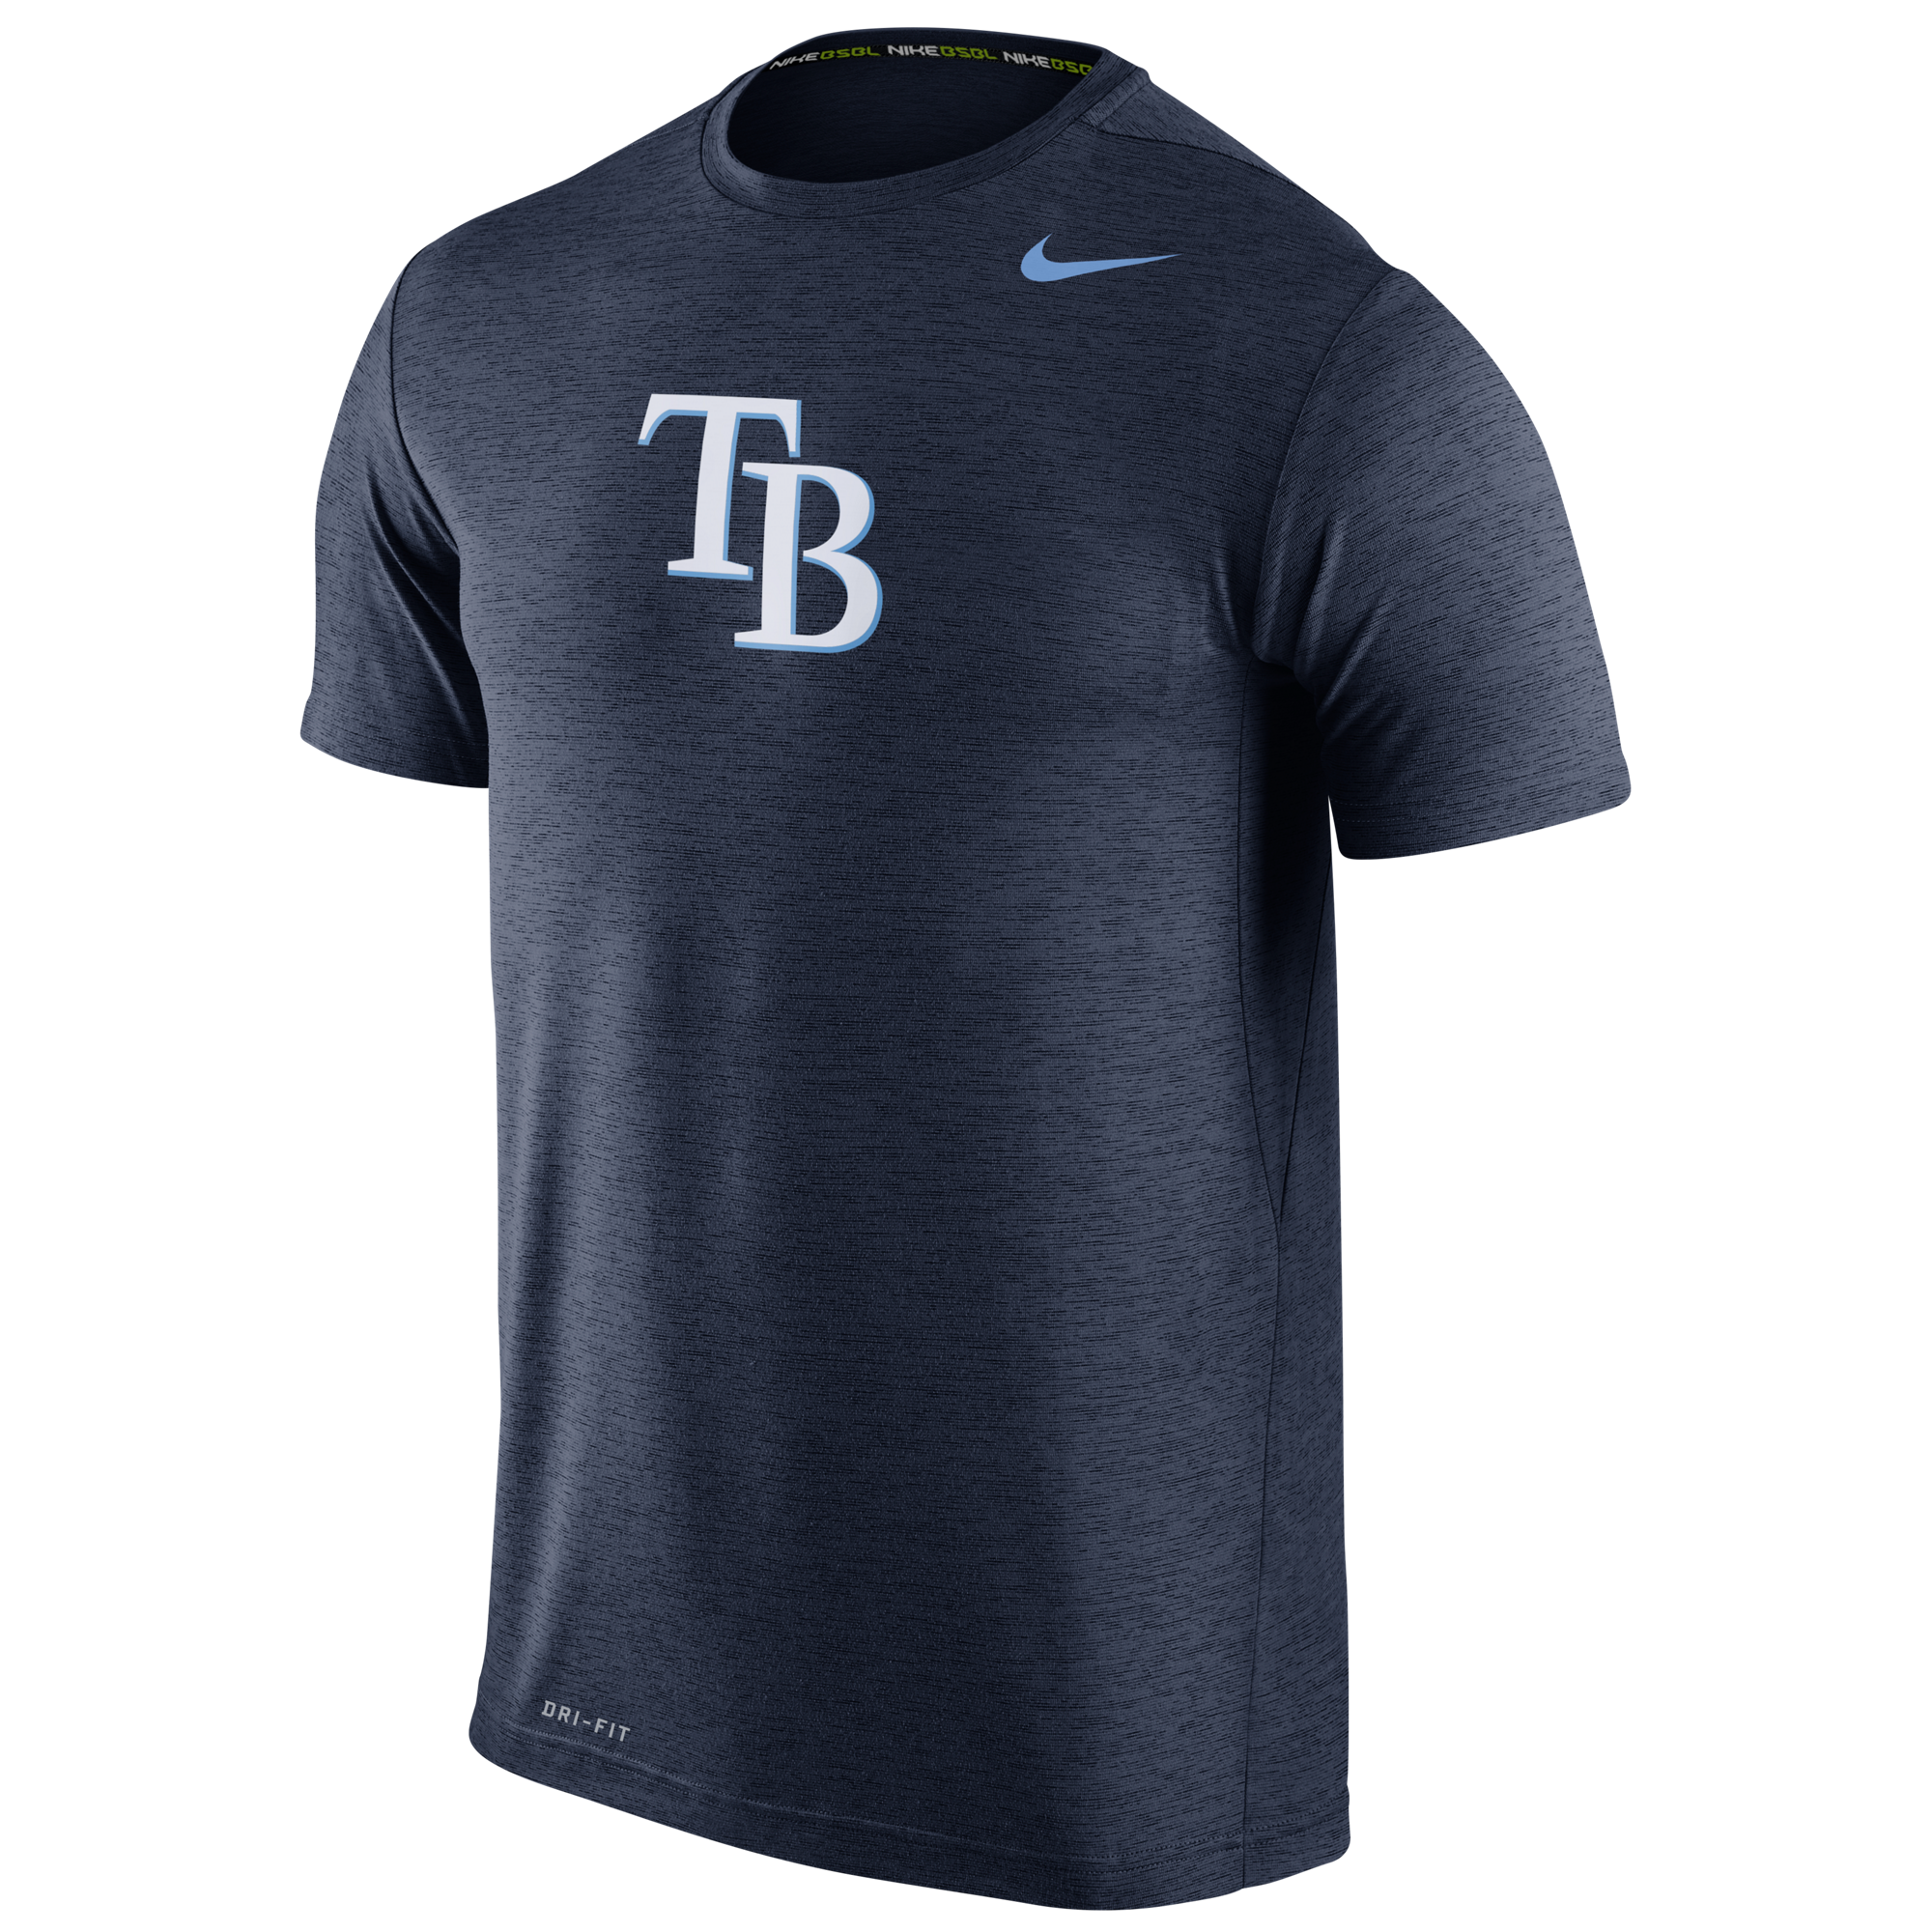 Nike Men's Tampa Bay Rays Touch Dri-Fit 